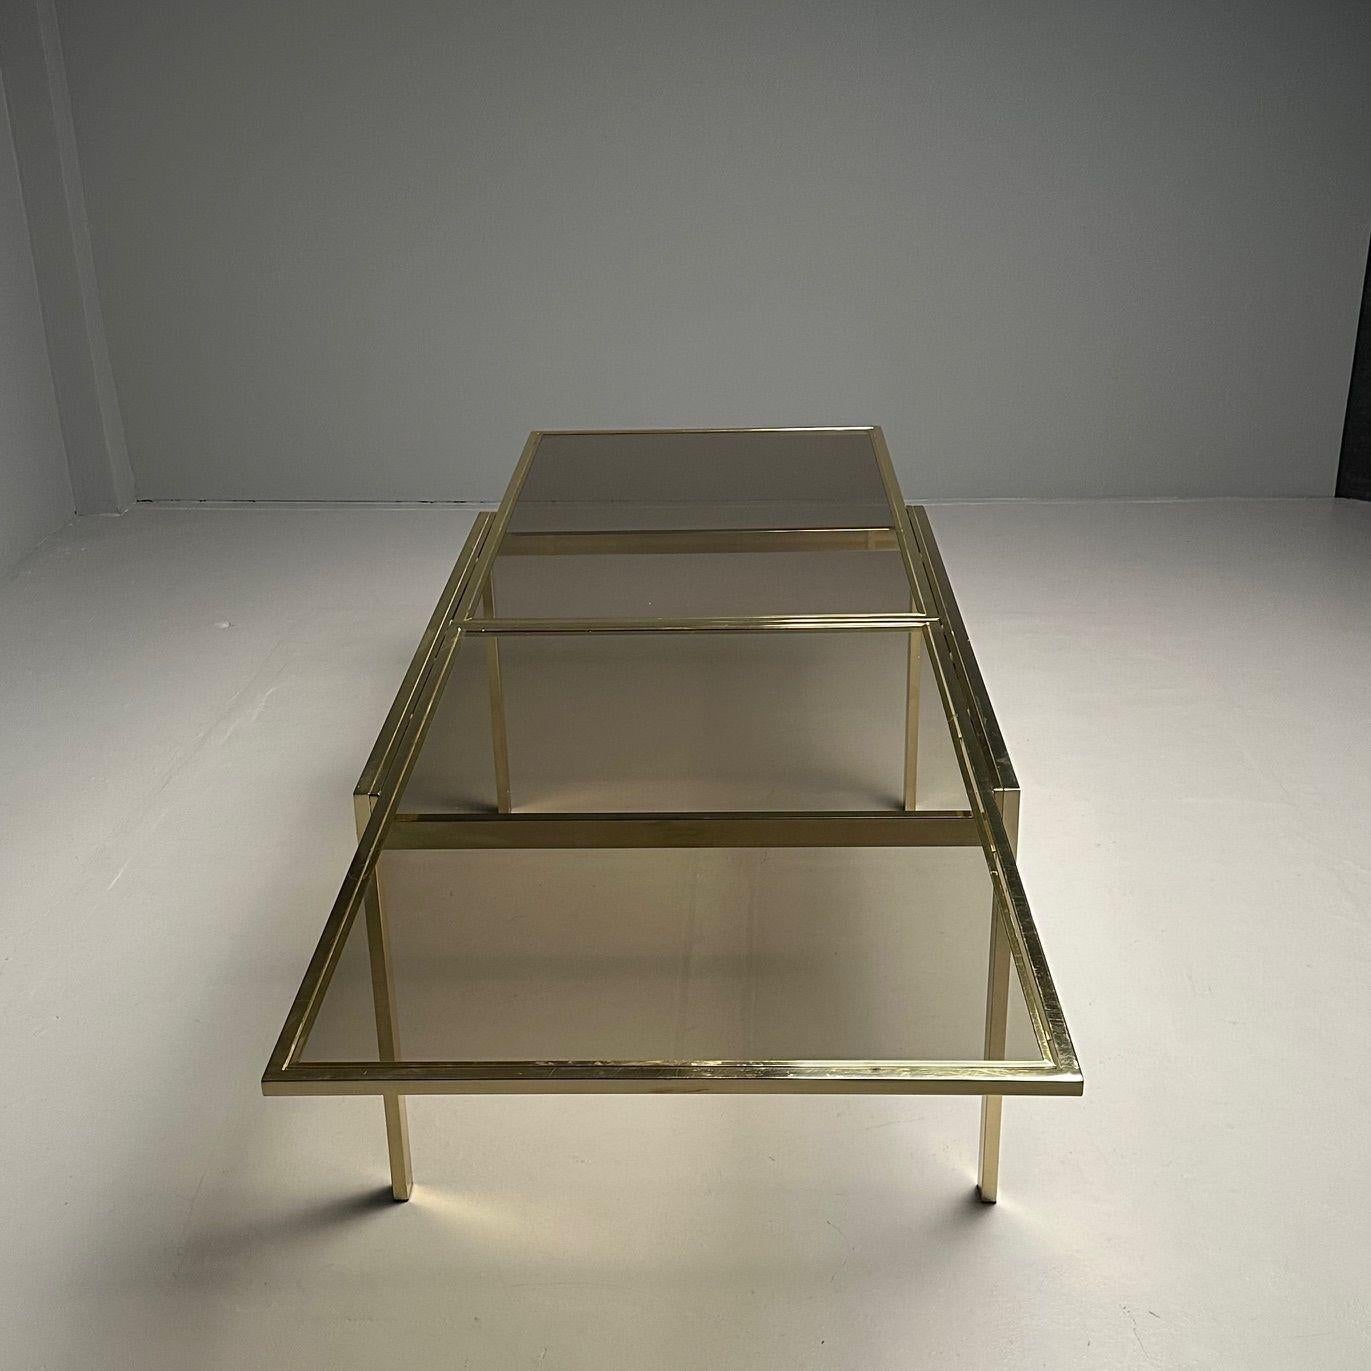 Milo Baughman, DIA, Mid-Century Modern Dining Table, Smoked Glass, Brass, Canada For Sale 4